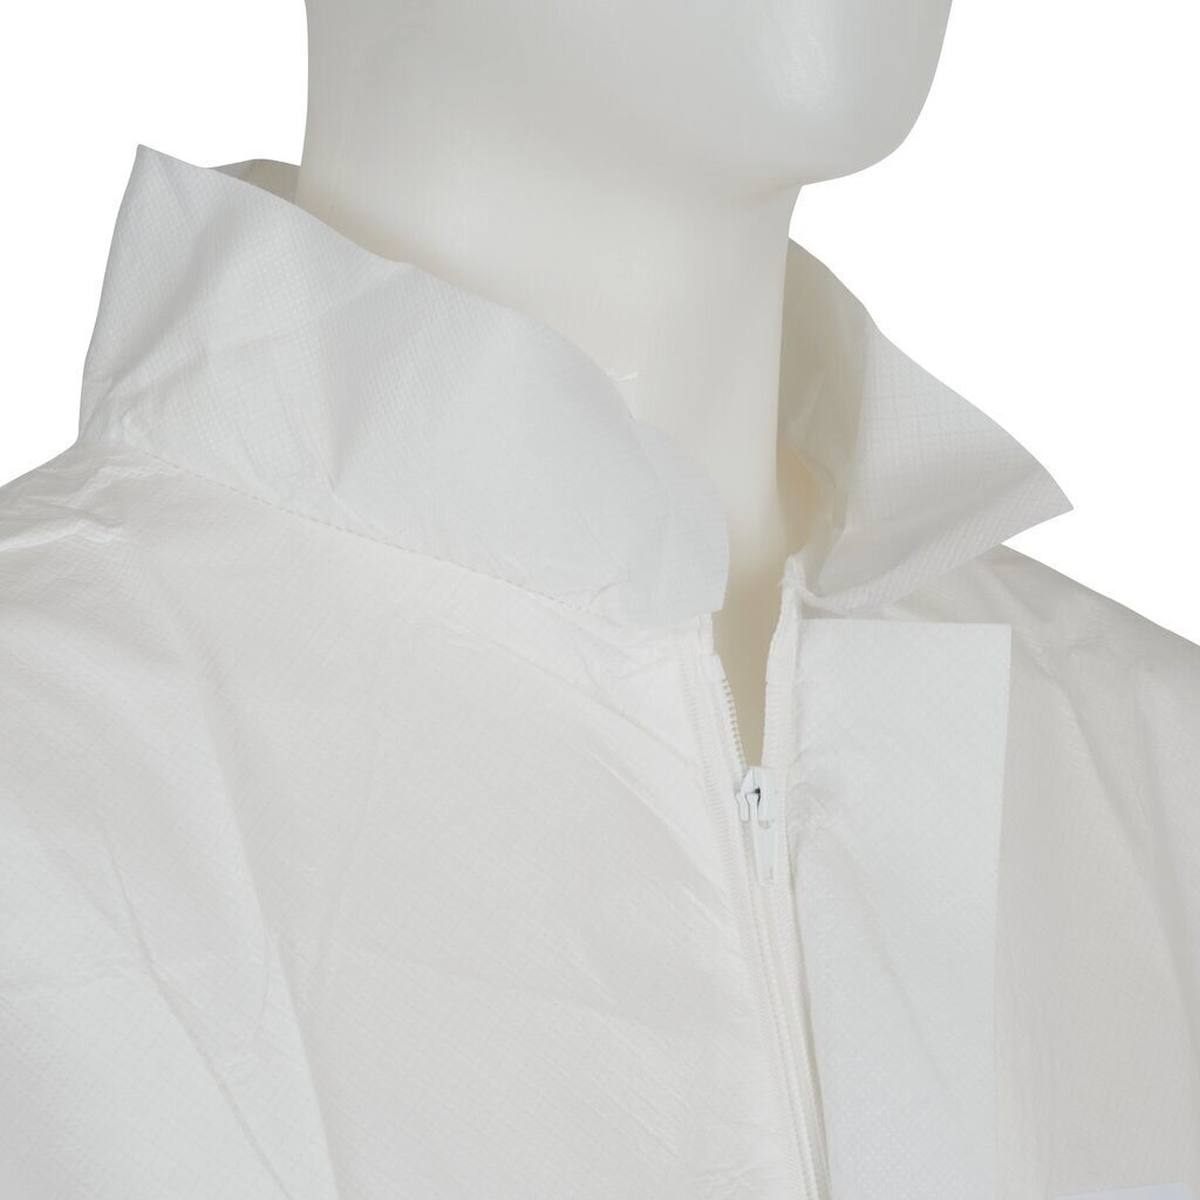 3M 4440 Coat, white, size XL, particularly breathable, very light, with zip, knitted cuffs